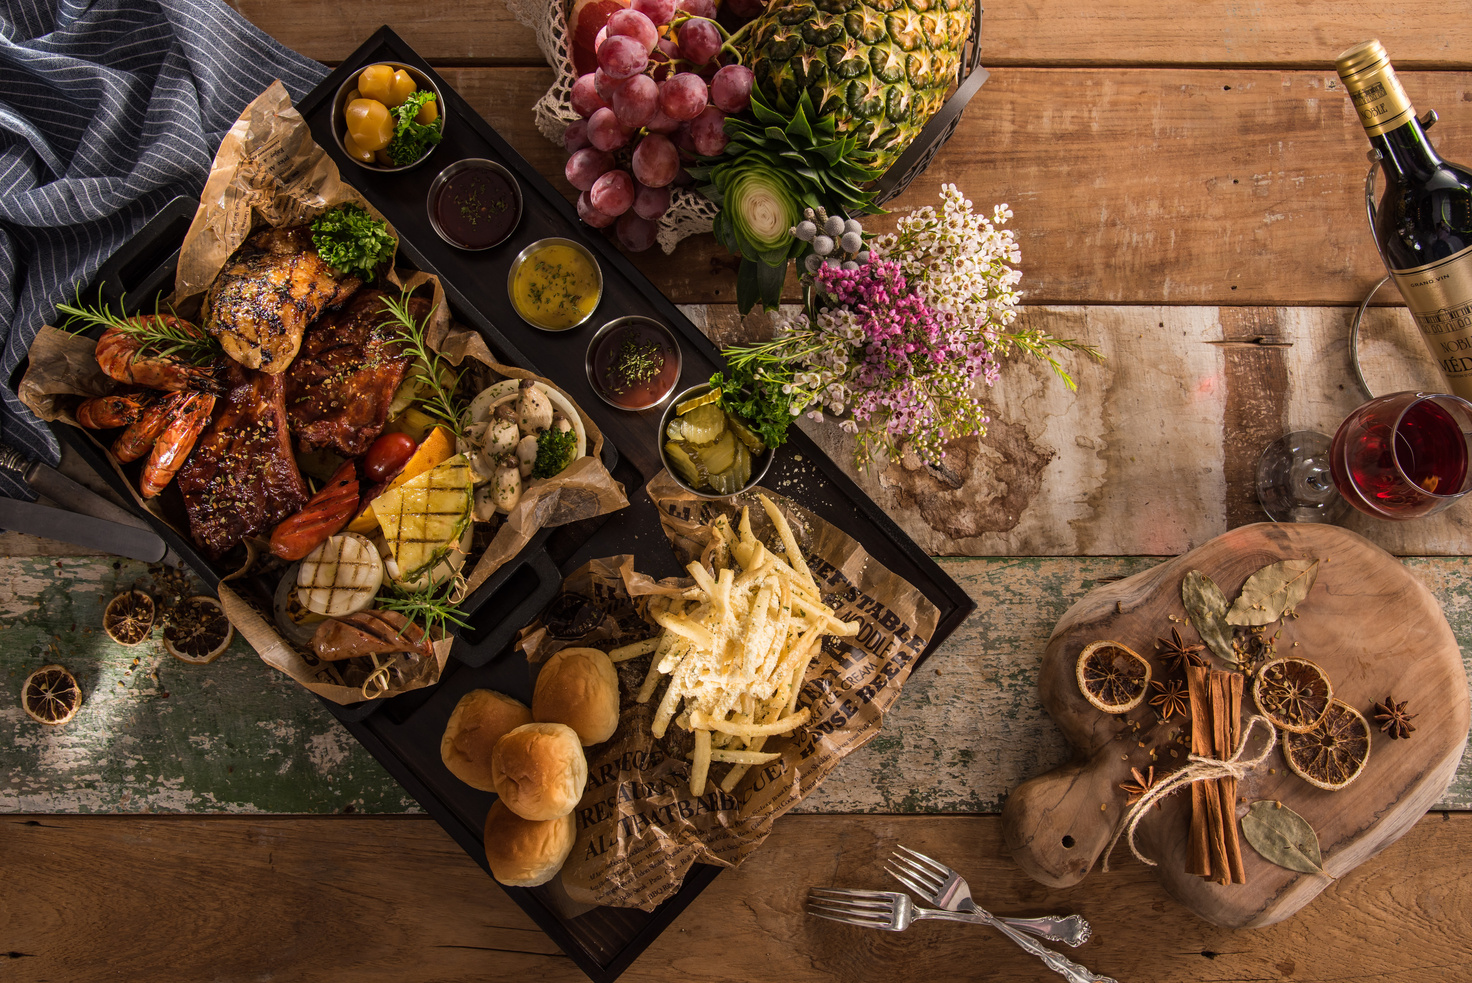 Top View of Delicious Catering on Wooden Table